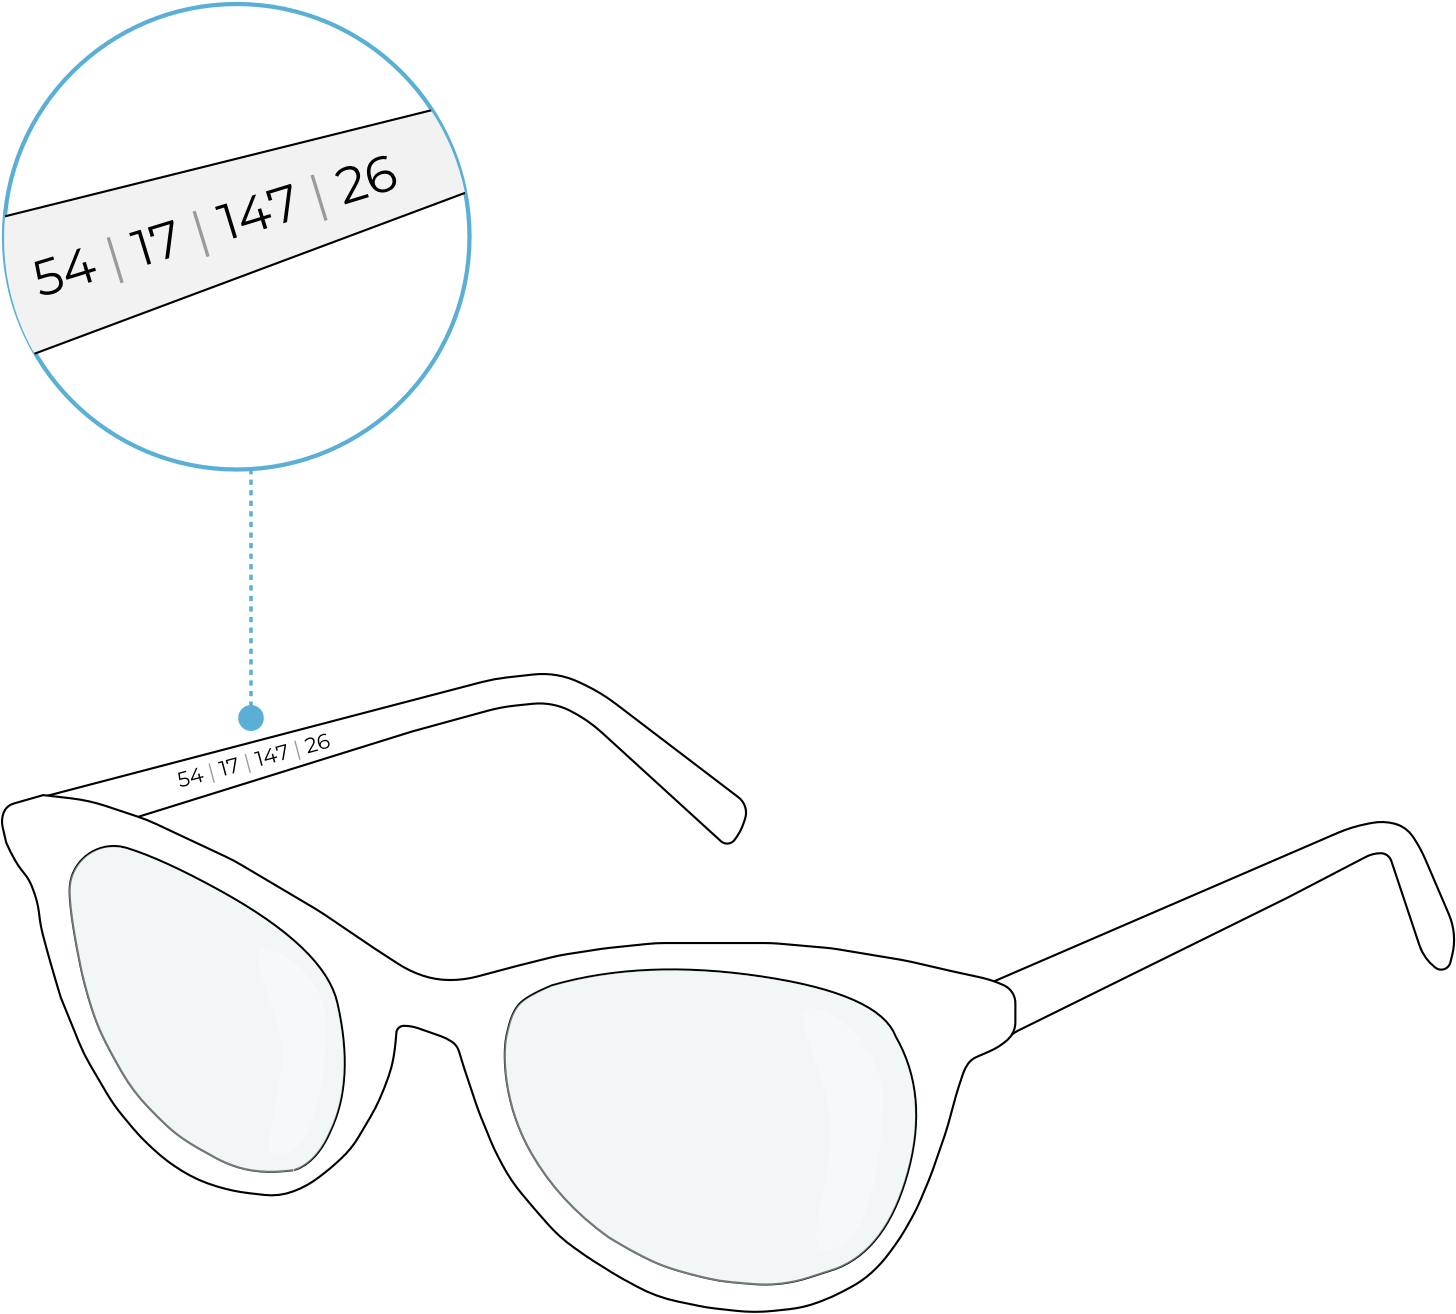 How To Measure Your Eyeglasses - Frame Size Guide | Marvel ...